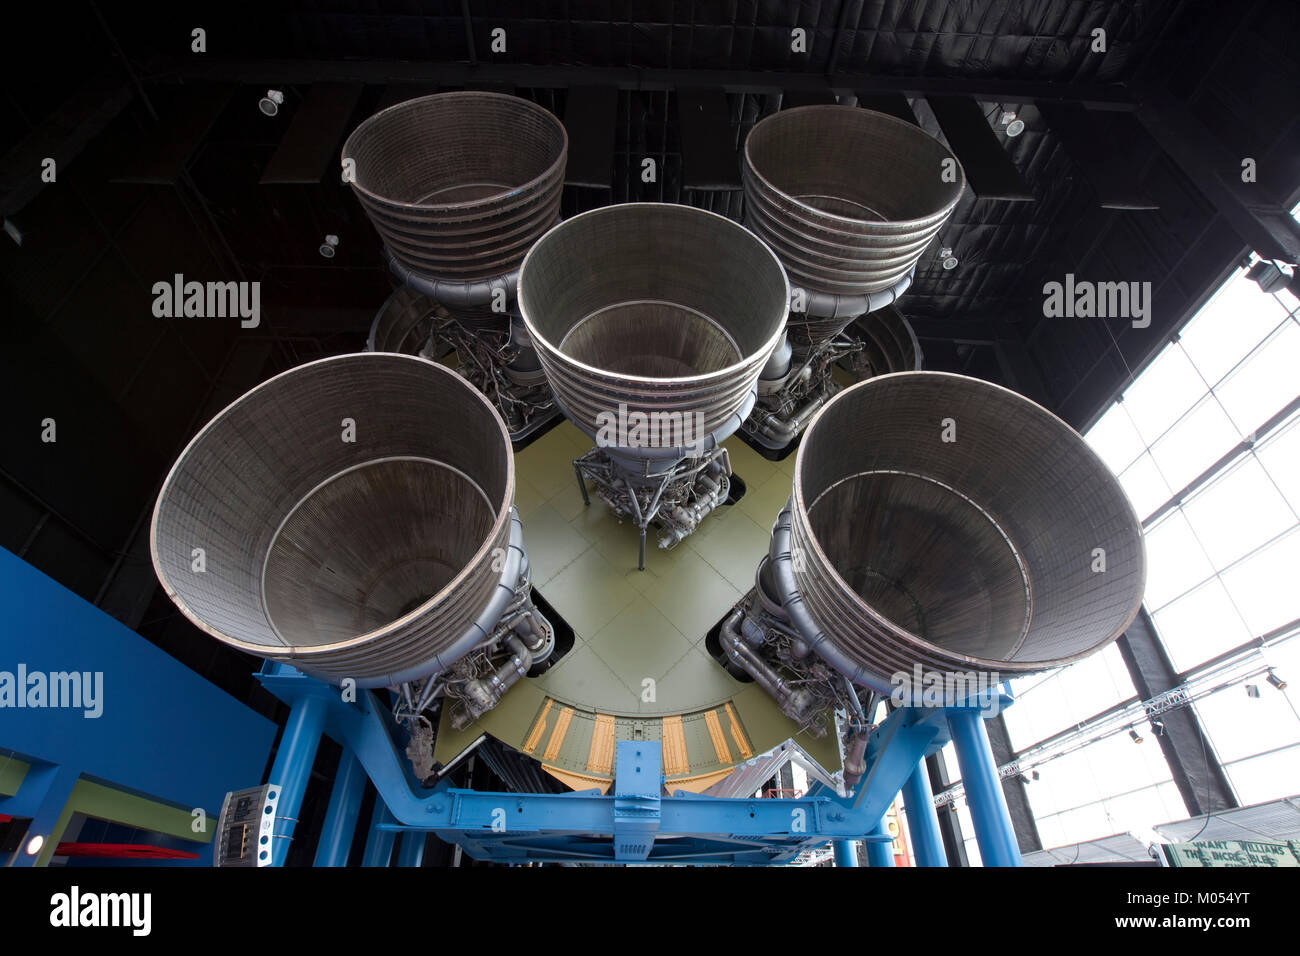 Rockets  at the Space Museum Stock Photo